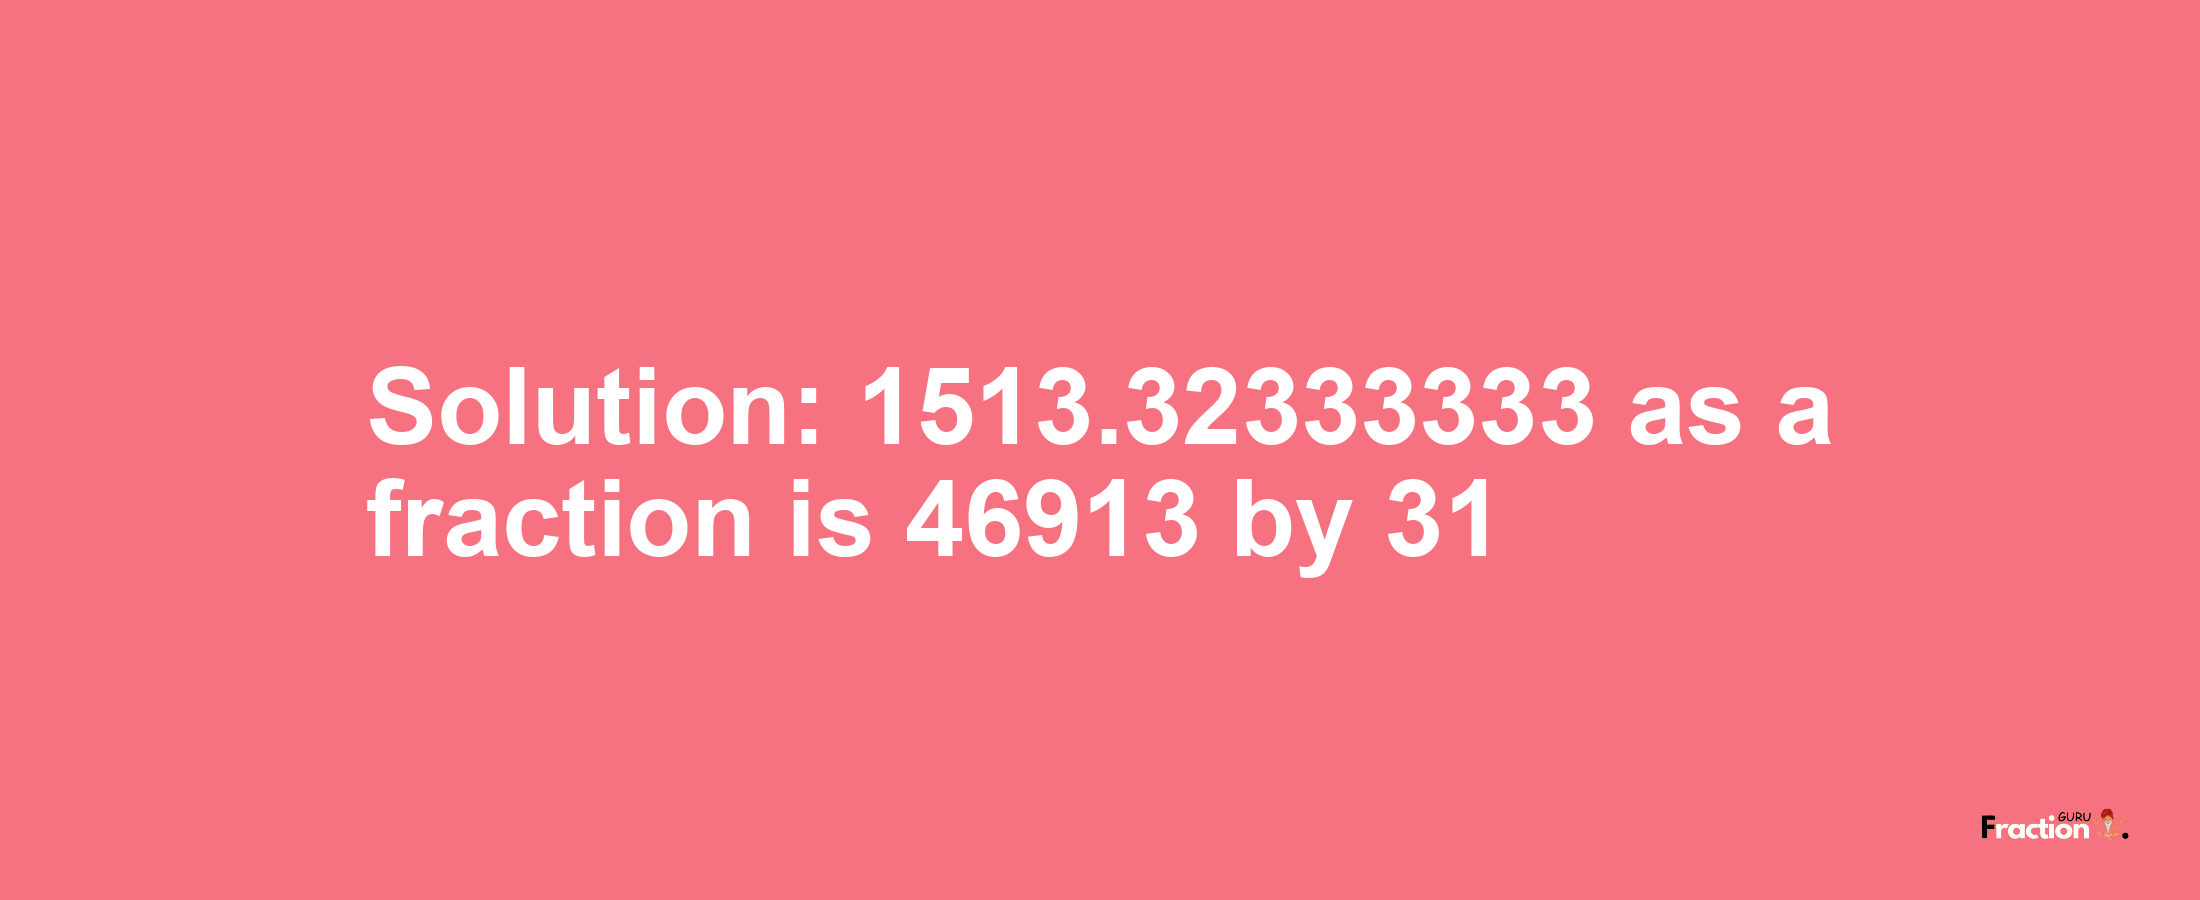 Solution:1513.32333333 as a fraction is 46913/31